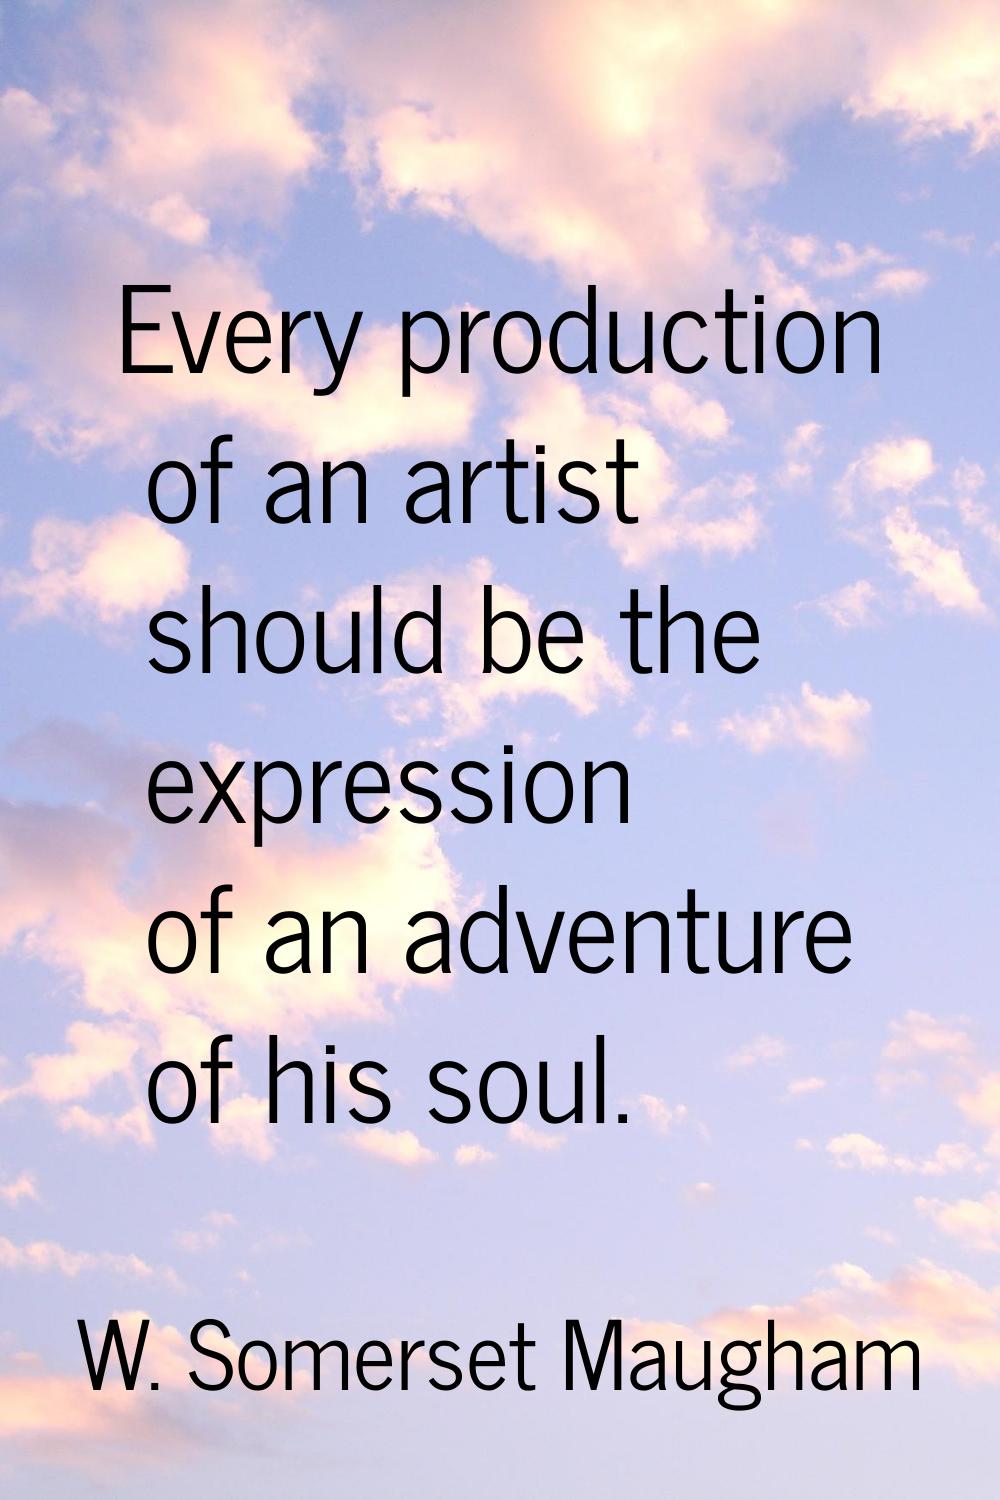 Every production of an artist should be the expression of an adventure of his soul.